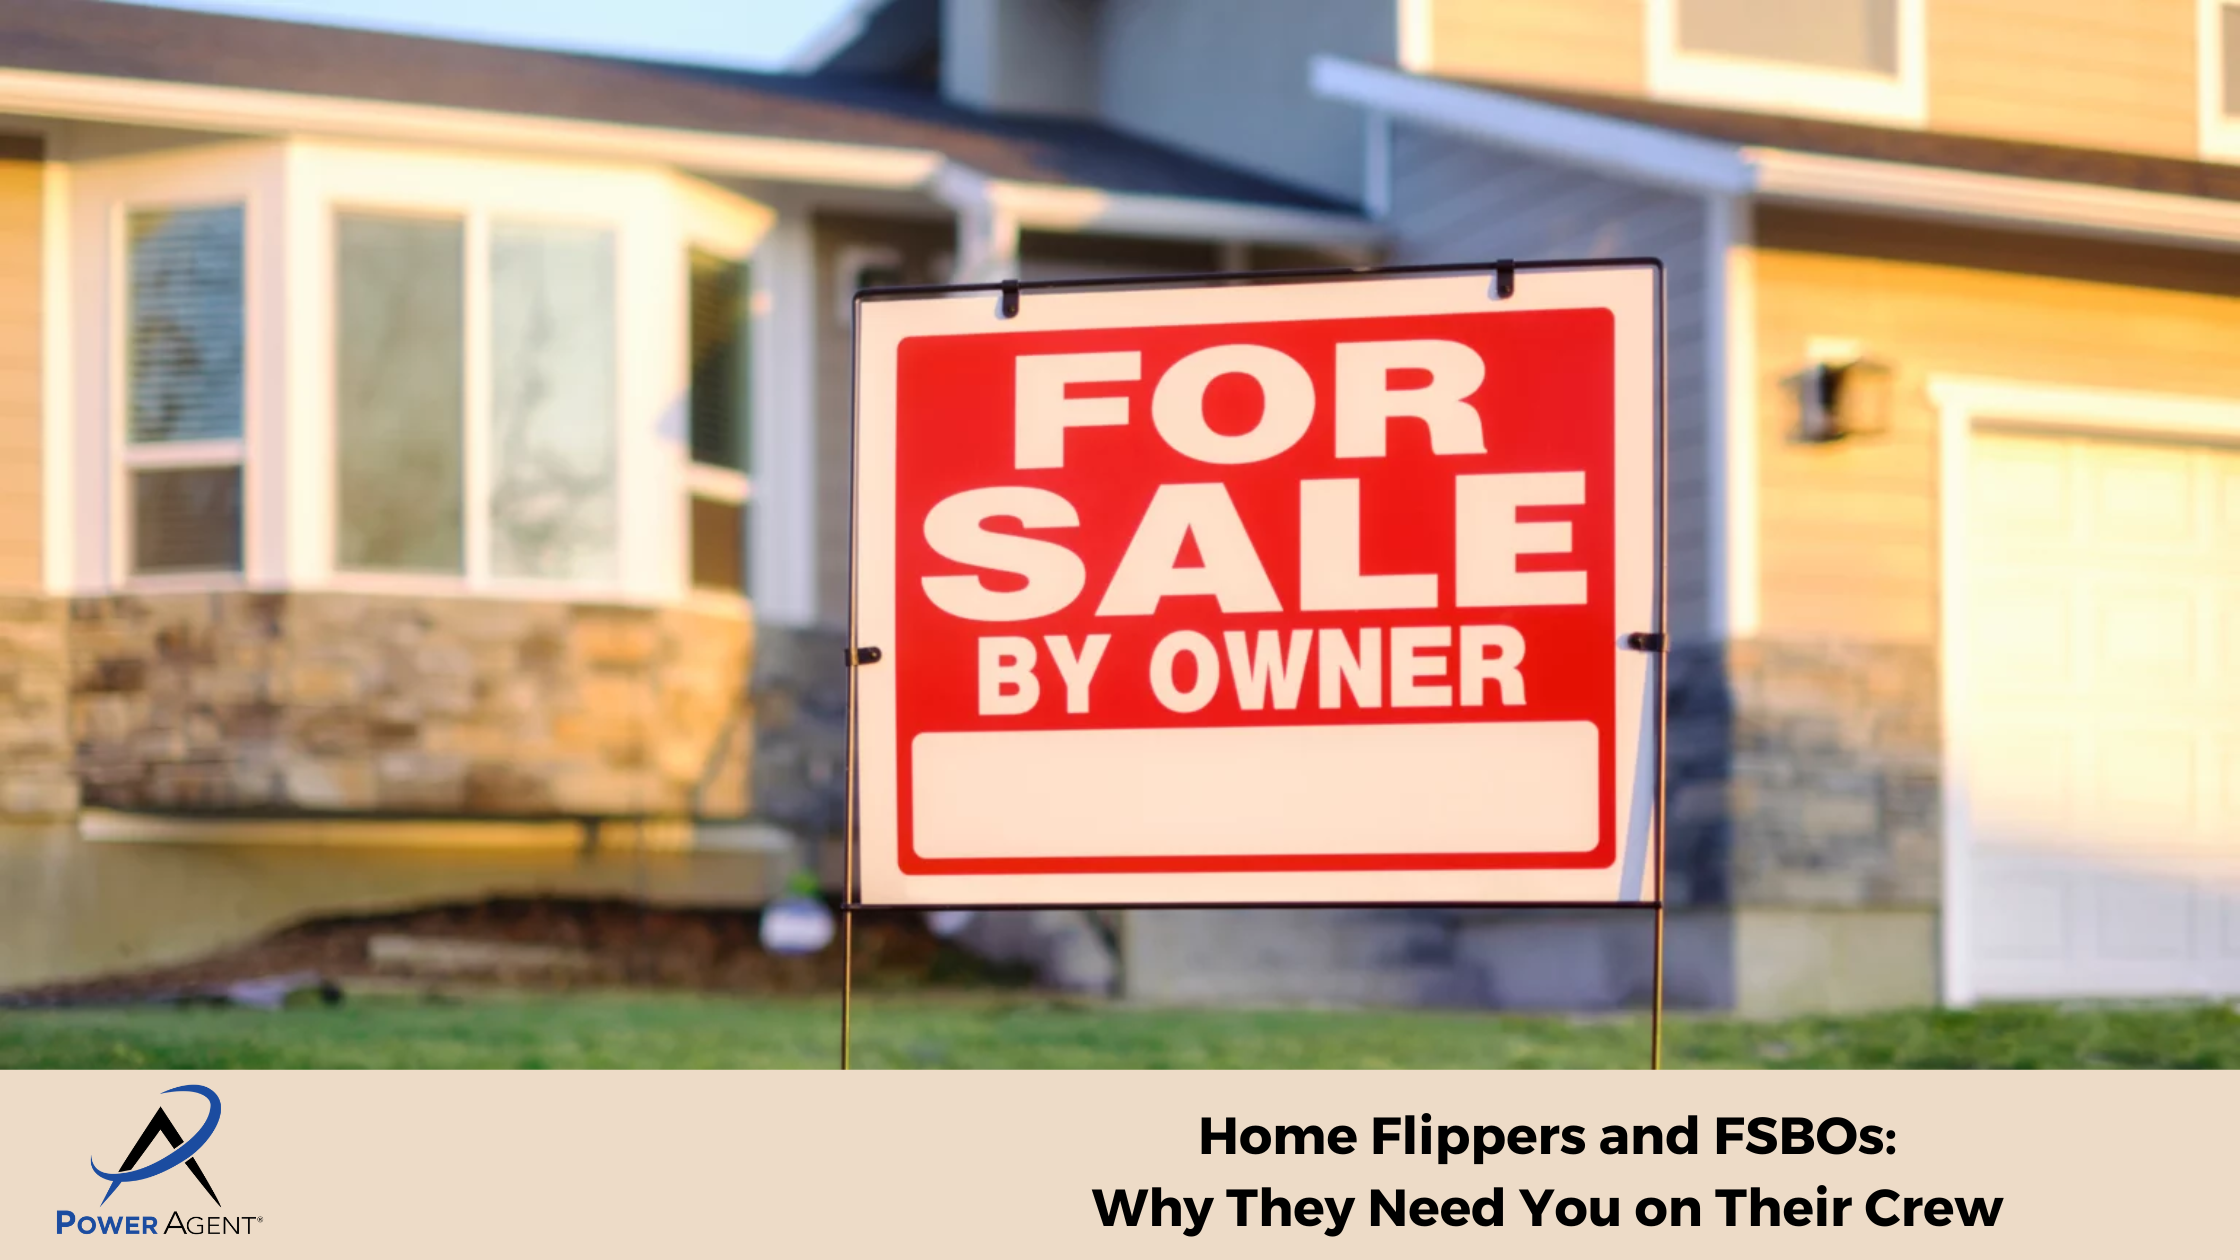 Home Flippers and FSBOs: Why They Need You on Their Crew